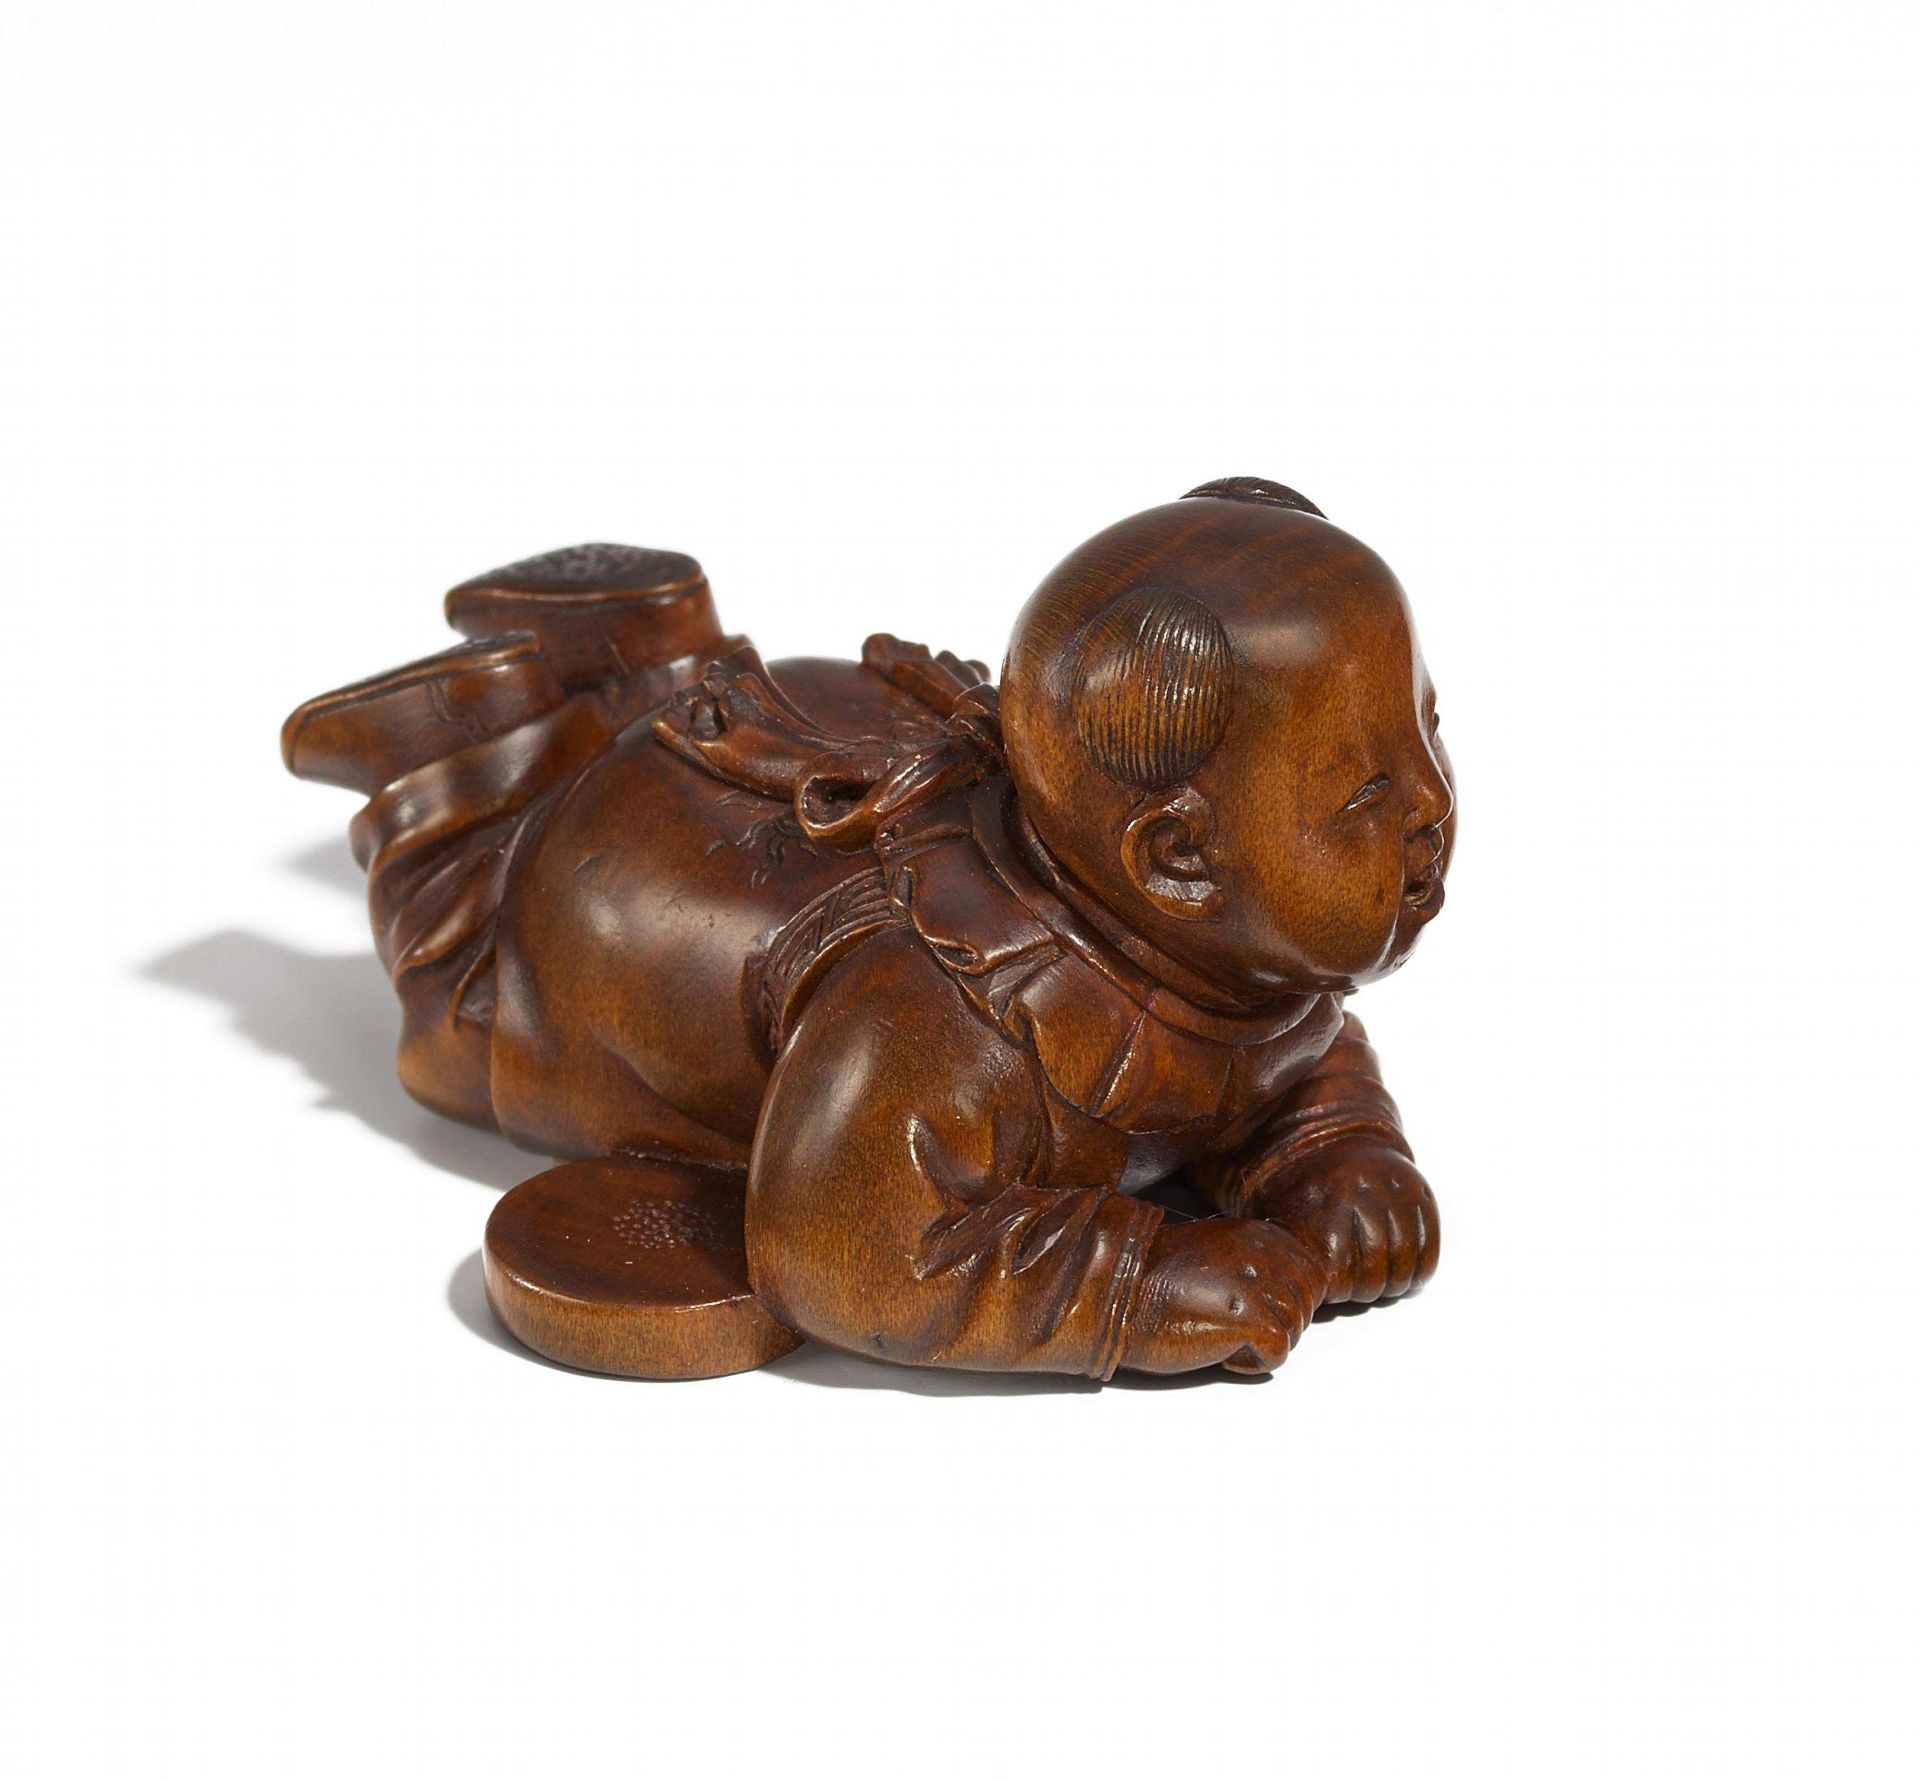 KARAKO RESTING ON HIS BELLY. Japan. Edo Period. 19th c. Boxwood, very delicately carved and